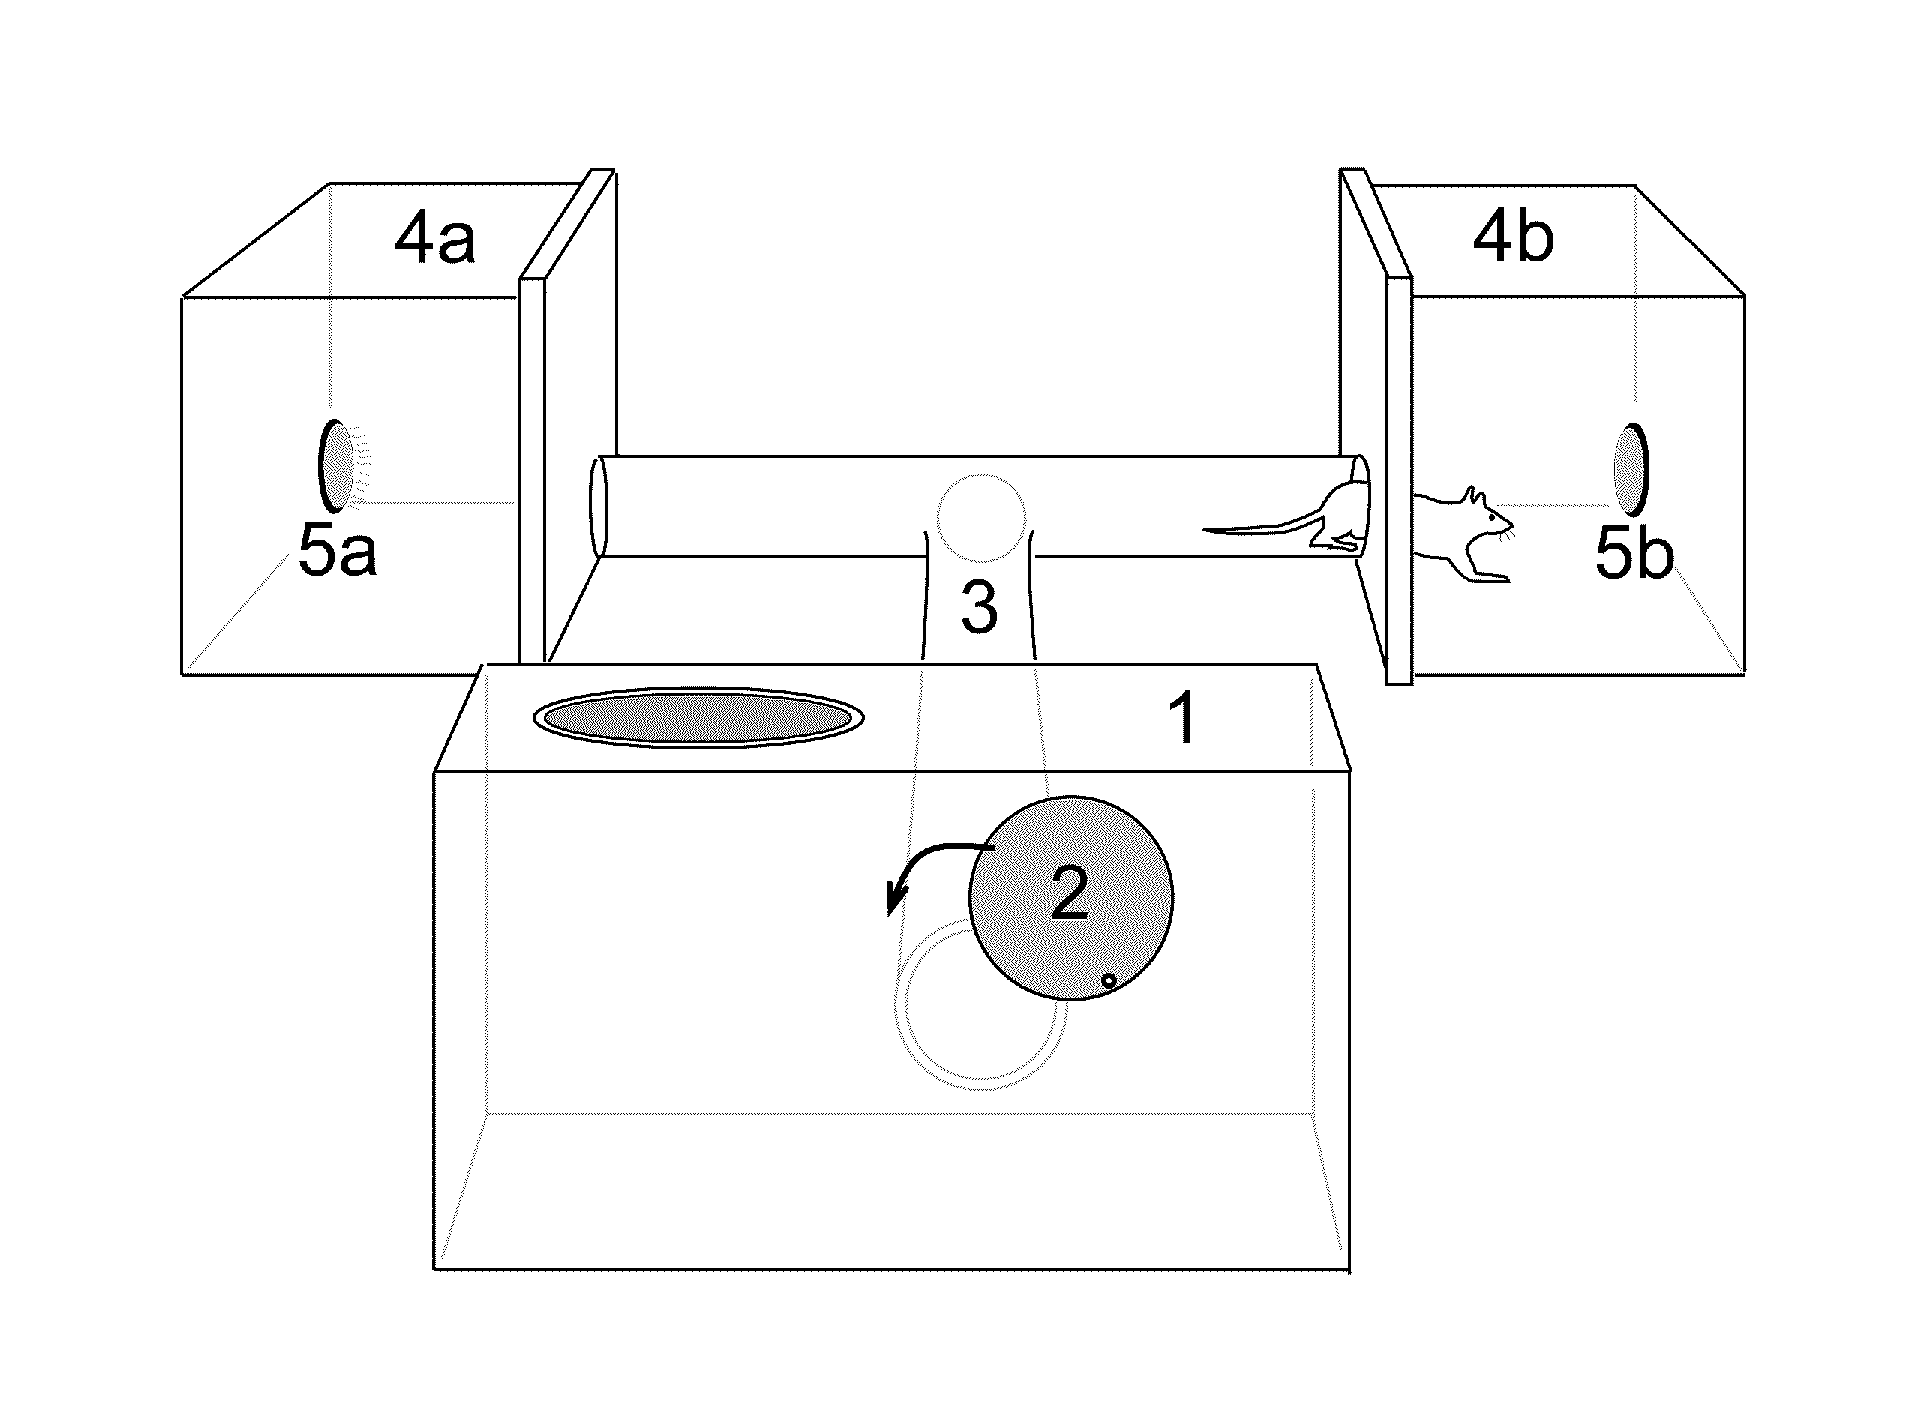 Methods and apparatus for attracting rats